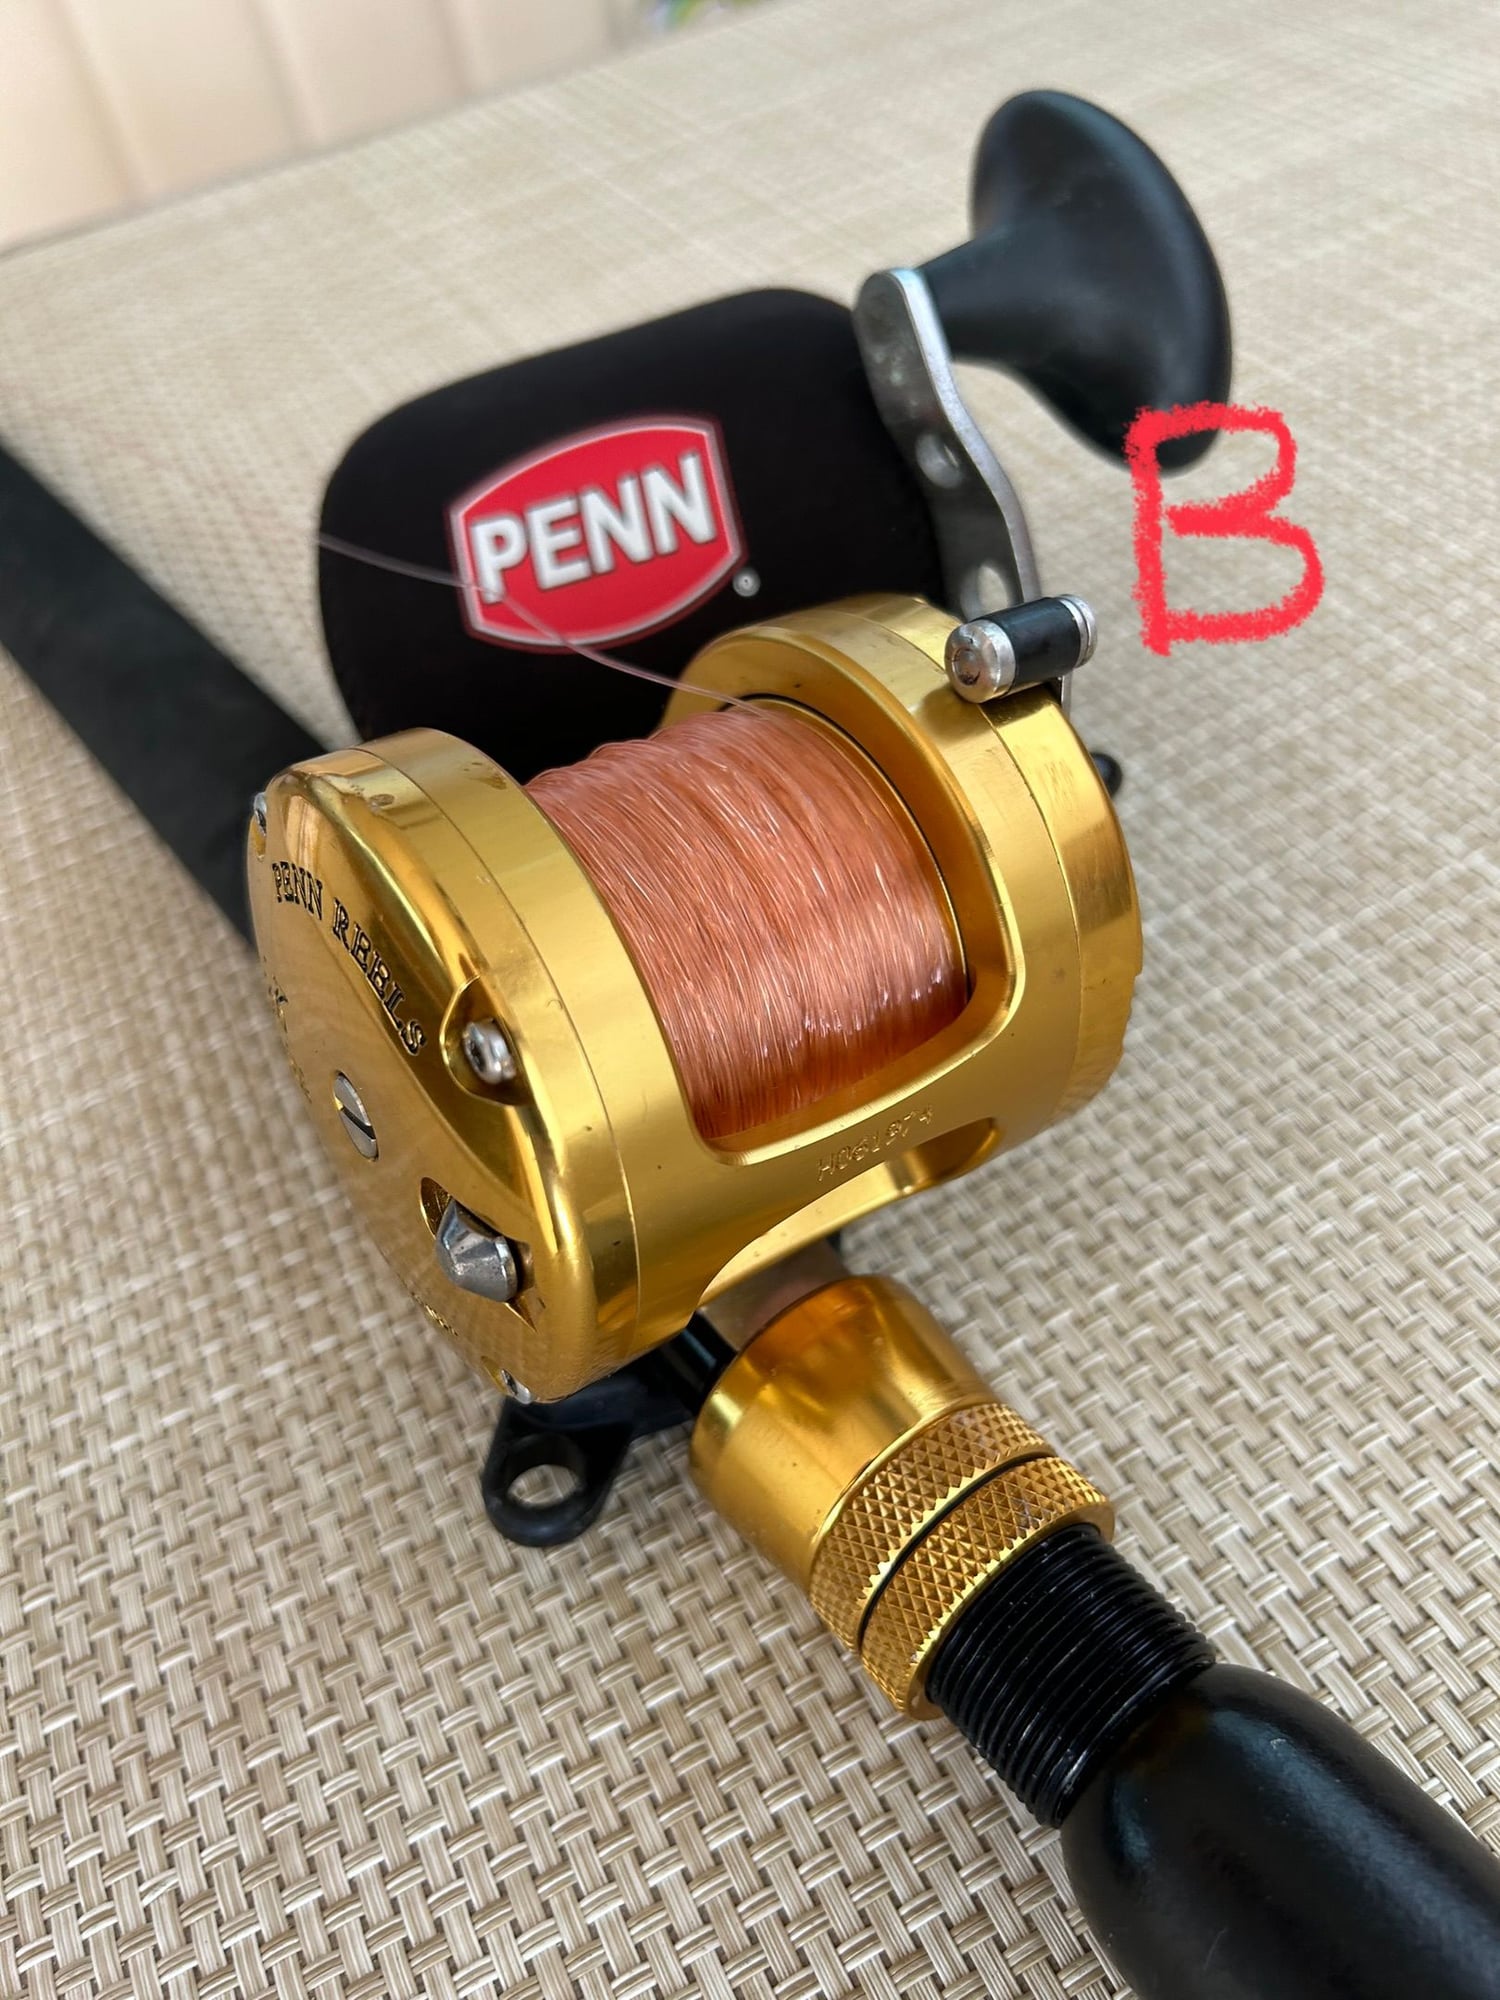 Penn International TRQ200 Reels on Star Aerial Rods - The Hull Truth -  Boating and Fishing Forum